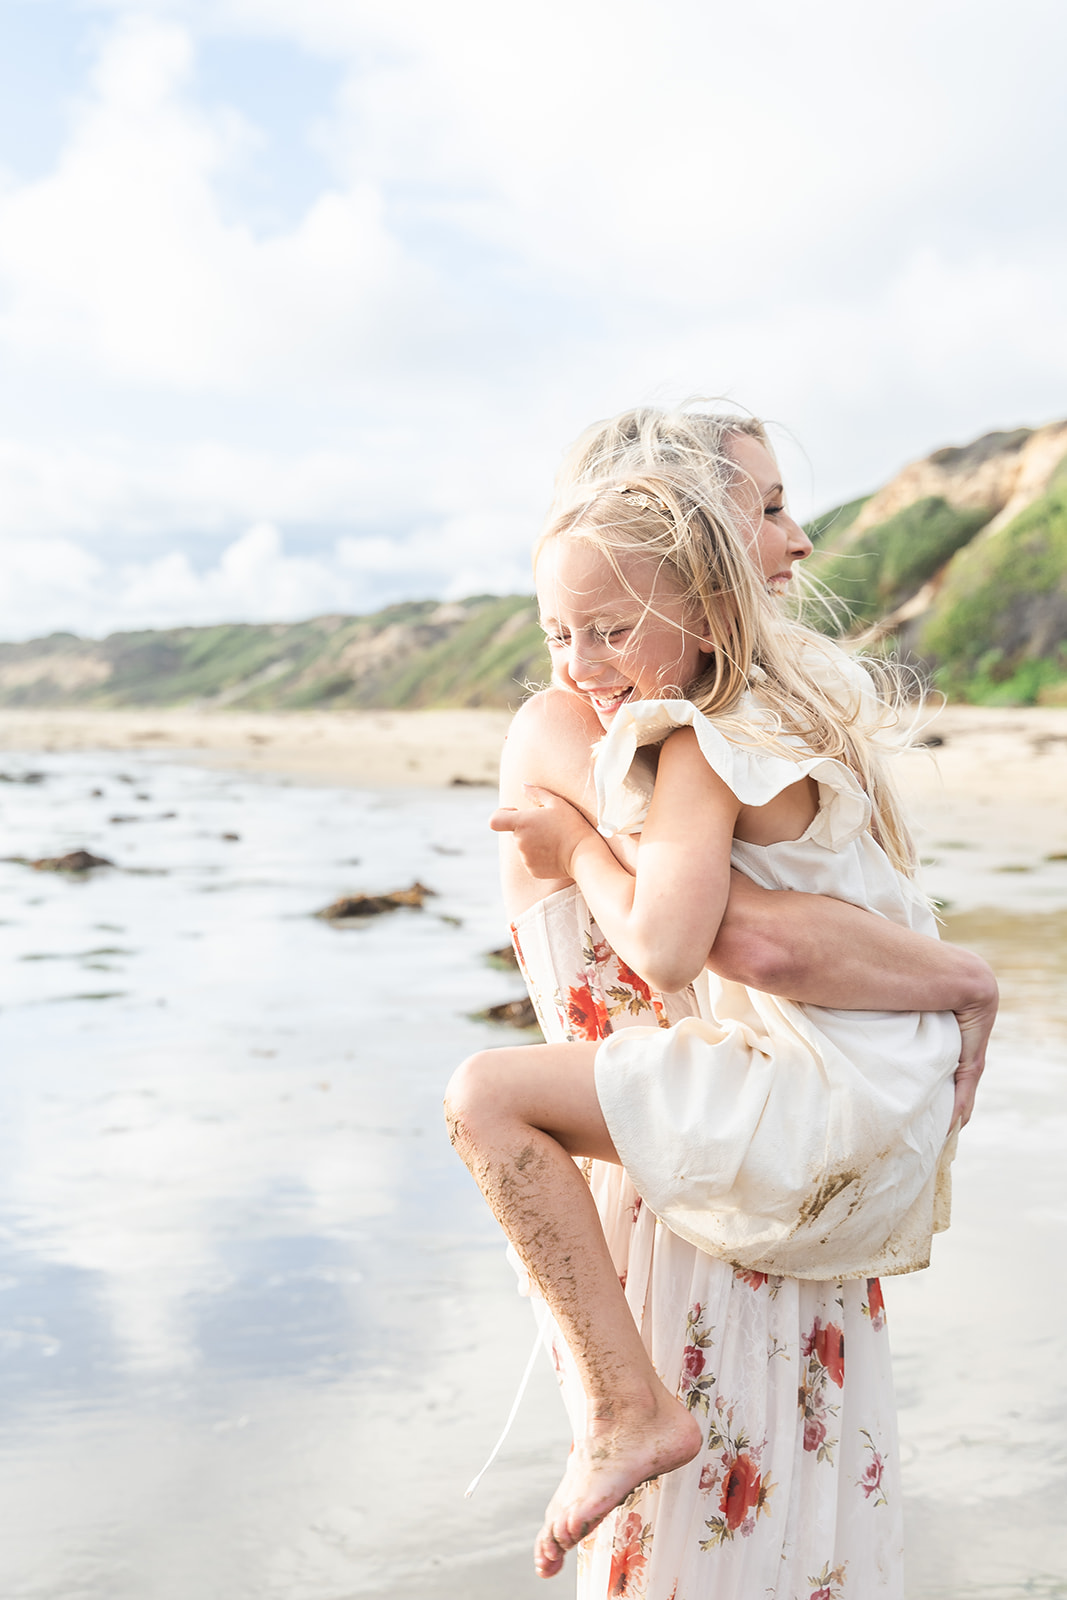 A mother in a floral dress carries her daughter on her hip while standing on a beach